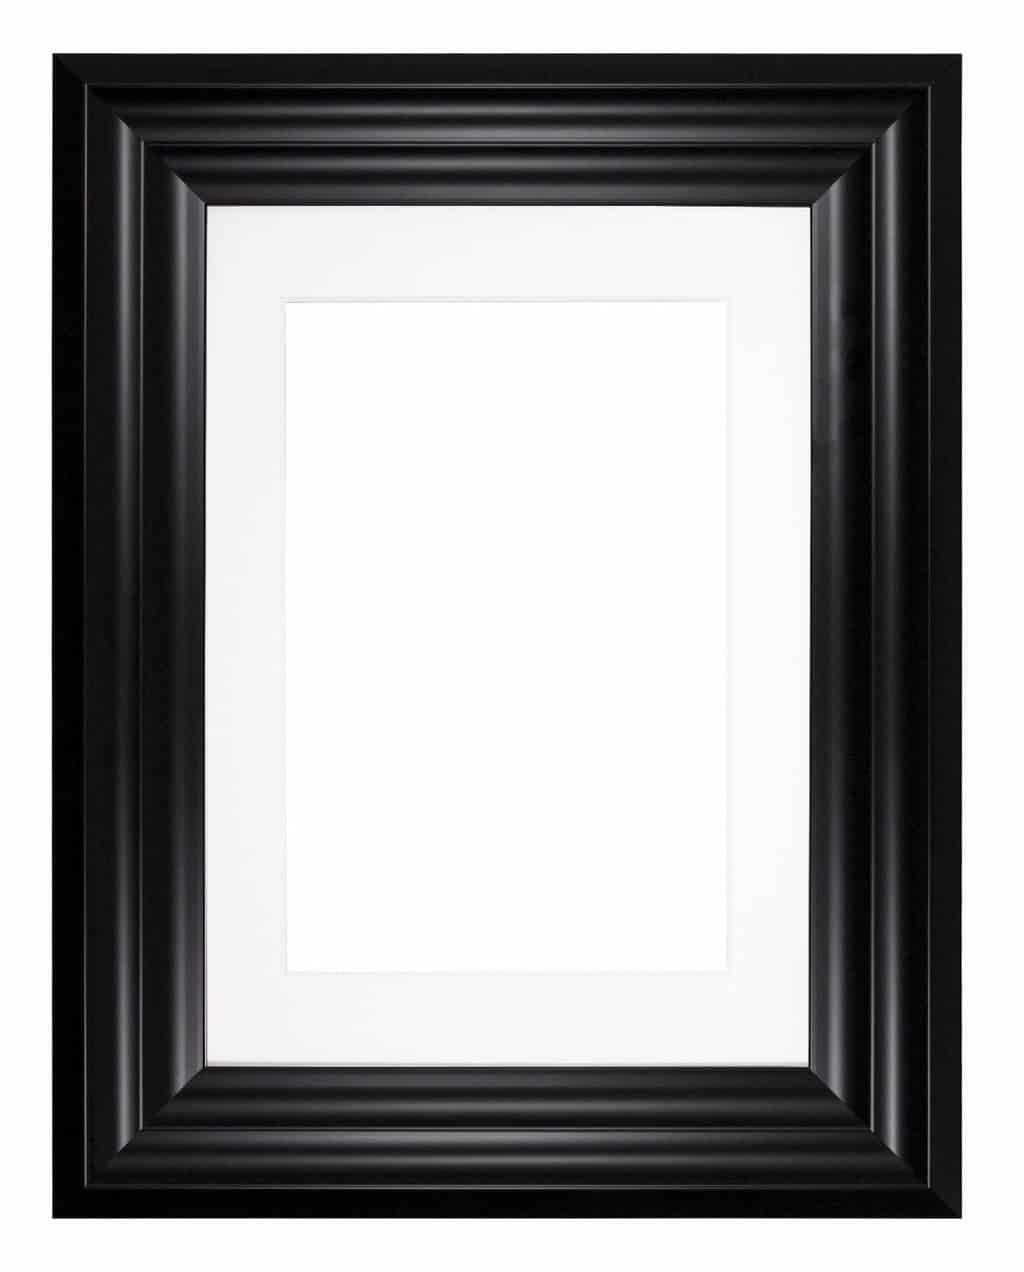 SQUARE BLACK PICTURE FRAME, 6X6 WOOD FRAME WITH SCOOP MOLDING